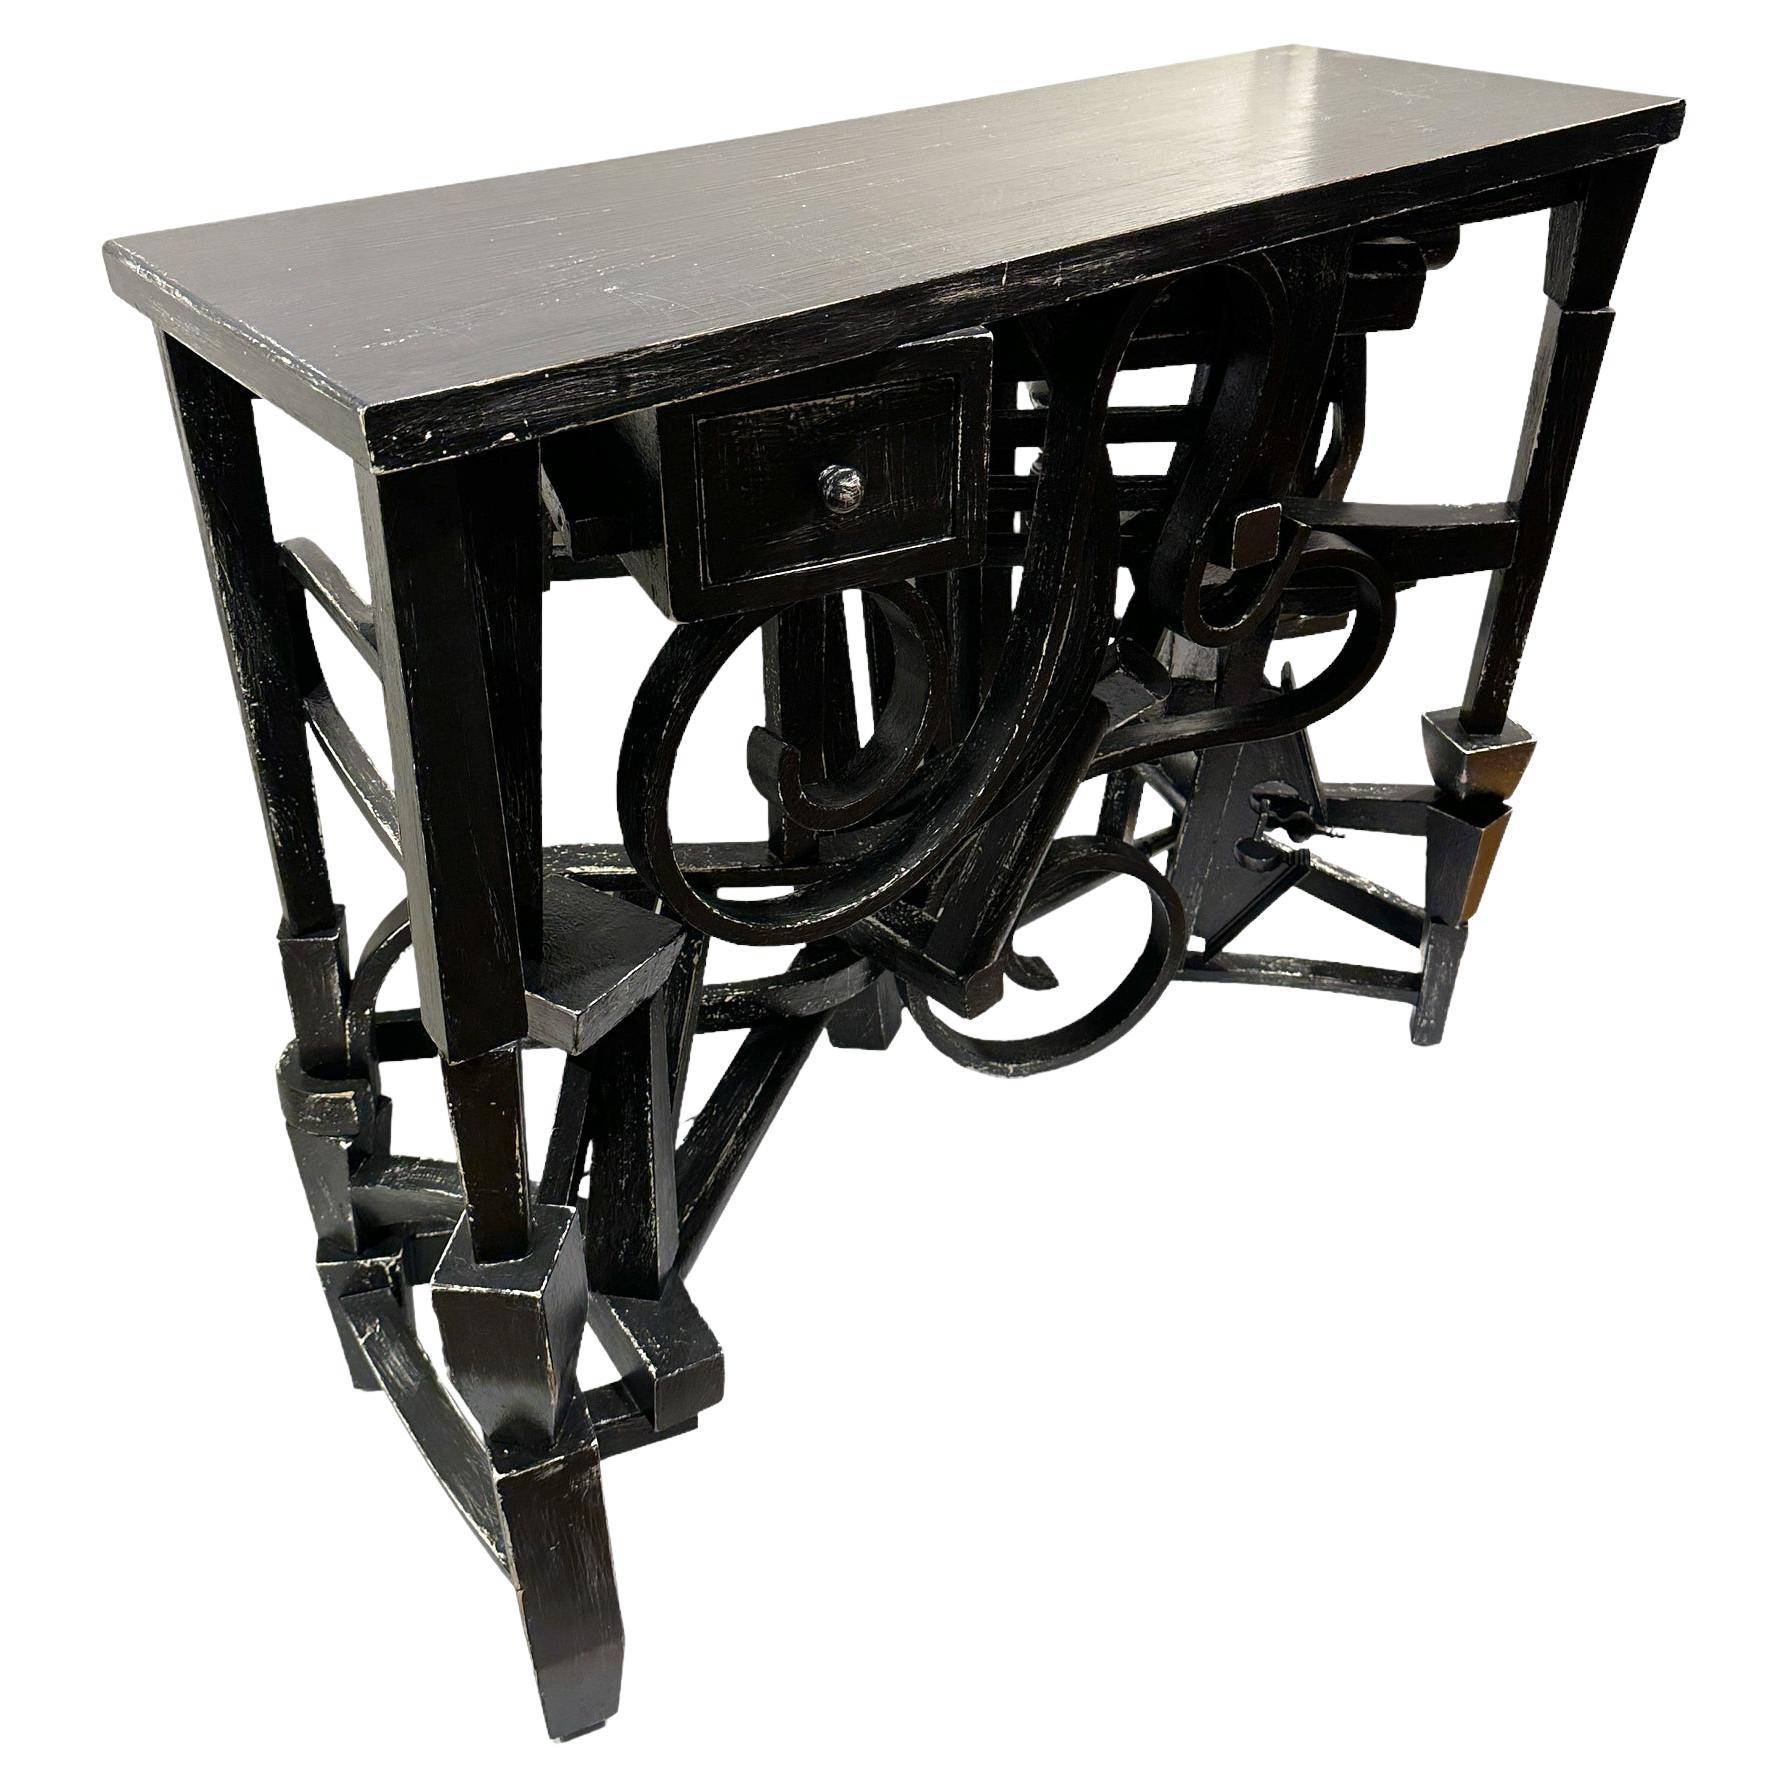 Modern Black Console/Entry Table with Drawer, Distressed, Found Wooden Spindles